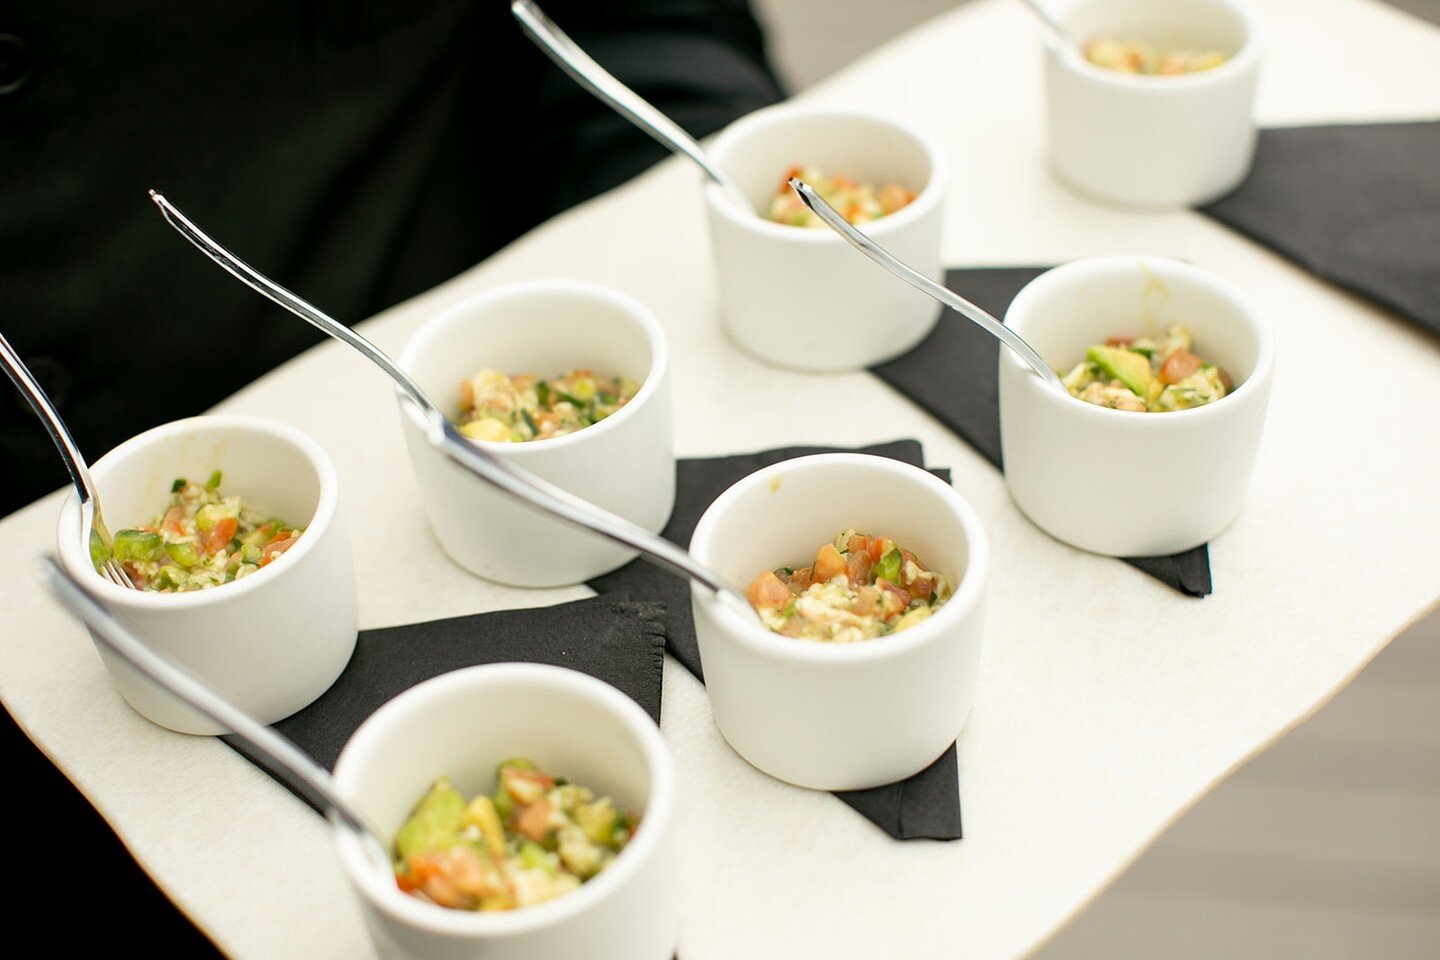 You had us at ceviche 😋🦐🥑 Serve fresh Ceviche Mexicano at any LM event! Made with shrimp, tomato, poblano, cilantro, and avocado 🤤

📸 @ryanmoorephotography
.
.
.
#lmcaters #chicagocatering #chicagoeventvenue #cateringchicago #ceviche #smallbites